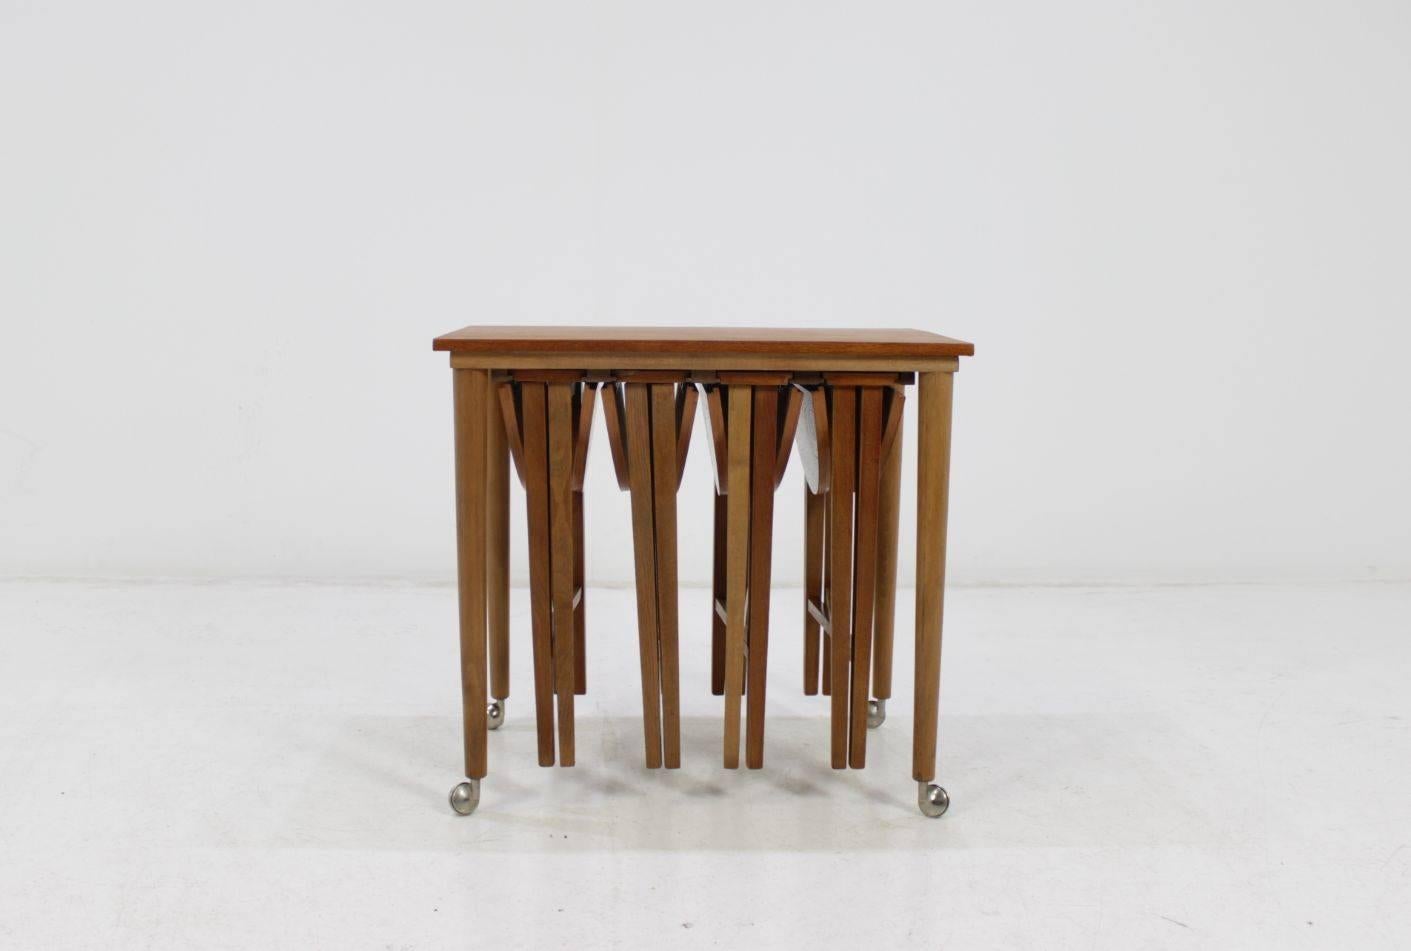 Set of five nest tables. Very practical. Wood professionally restored and revived.